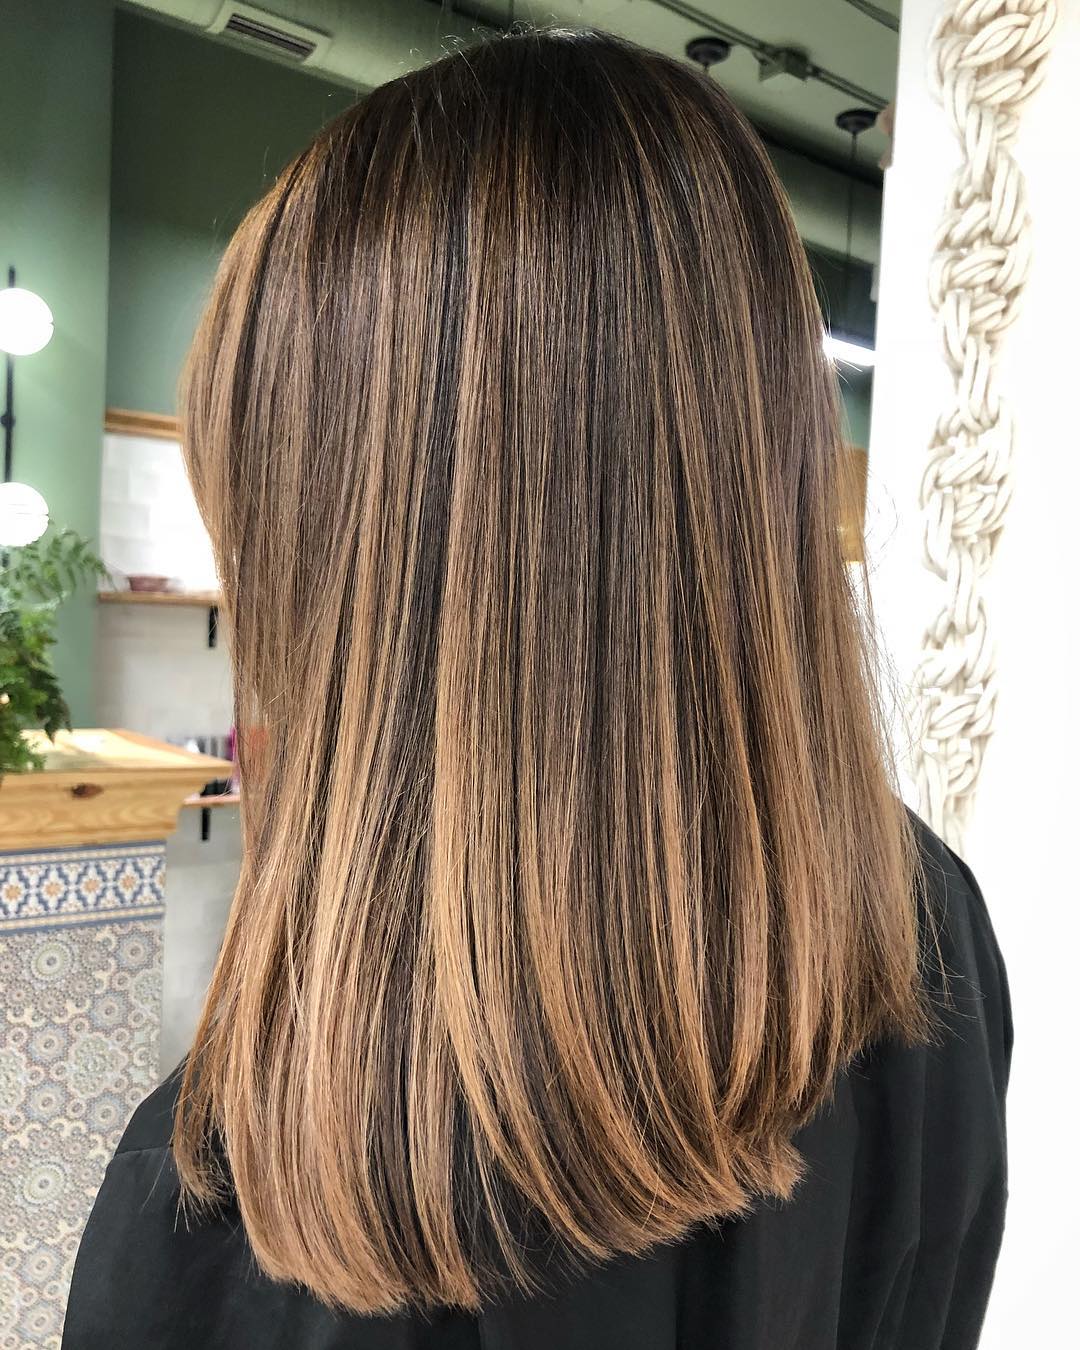 Lived-In Caramel Highlights For Brown Hair